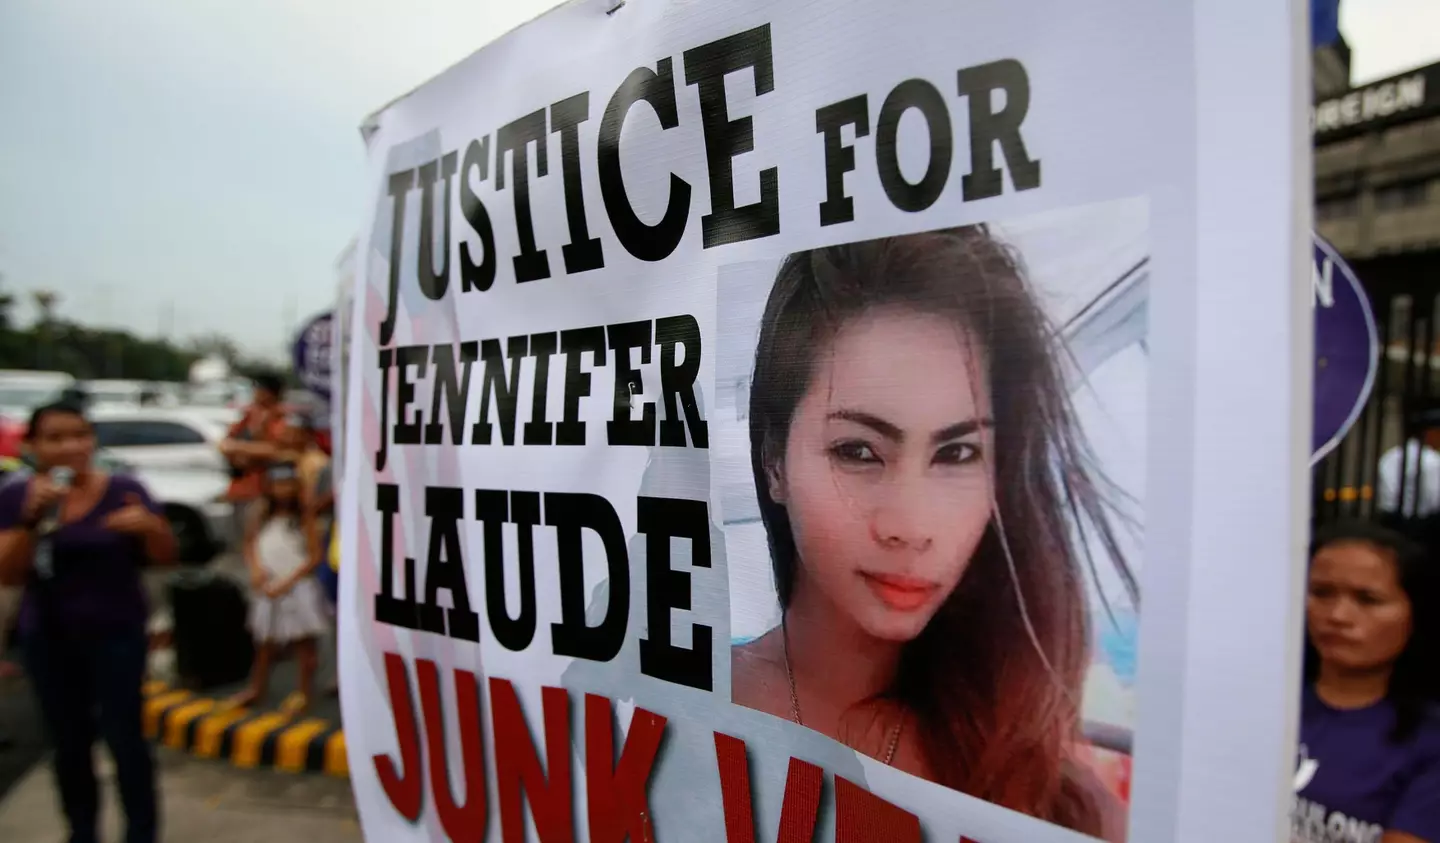 Protests following Jennifer Laude's death in 2014.